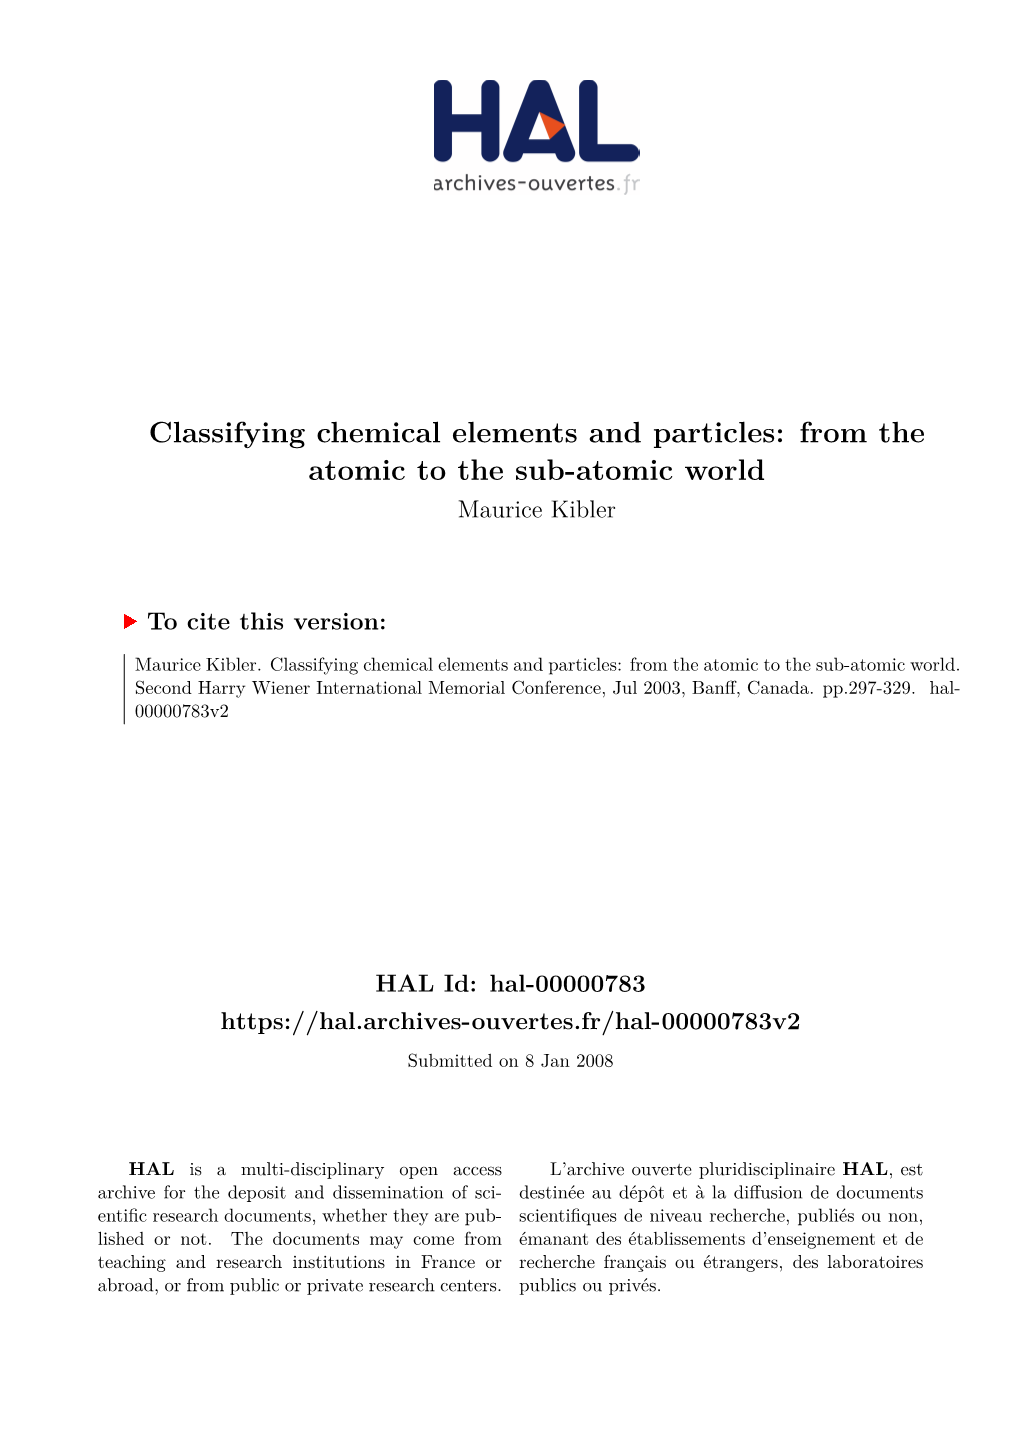 Classifying Chemical Elements and Particles: from the Atomic to the Sub-Atomic World Maurice Kibler